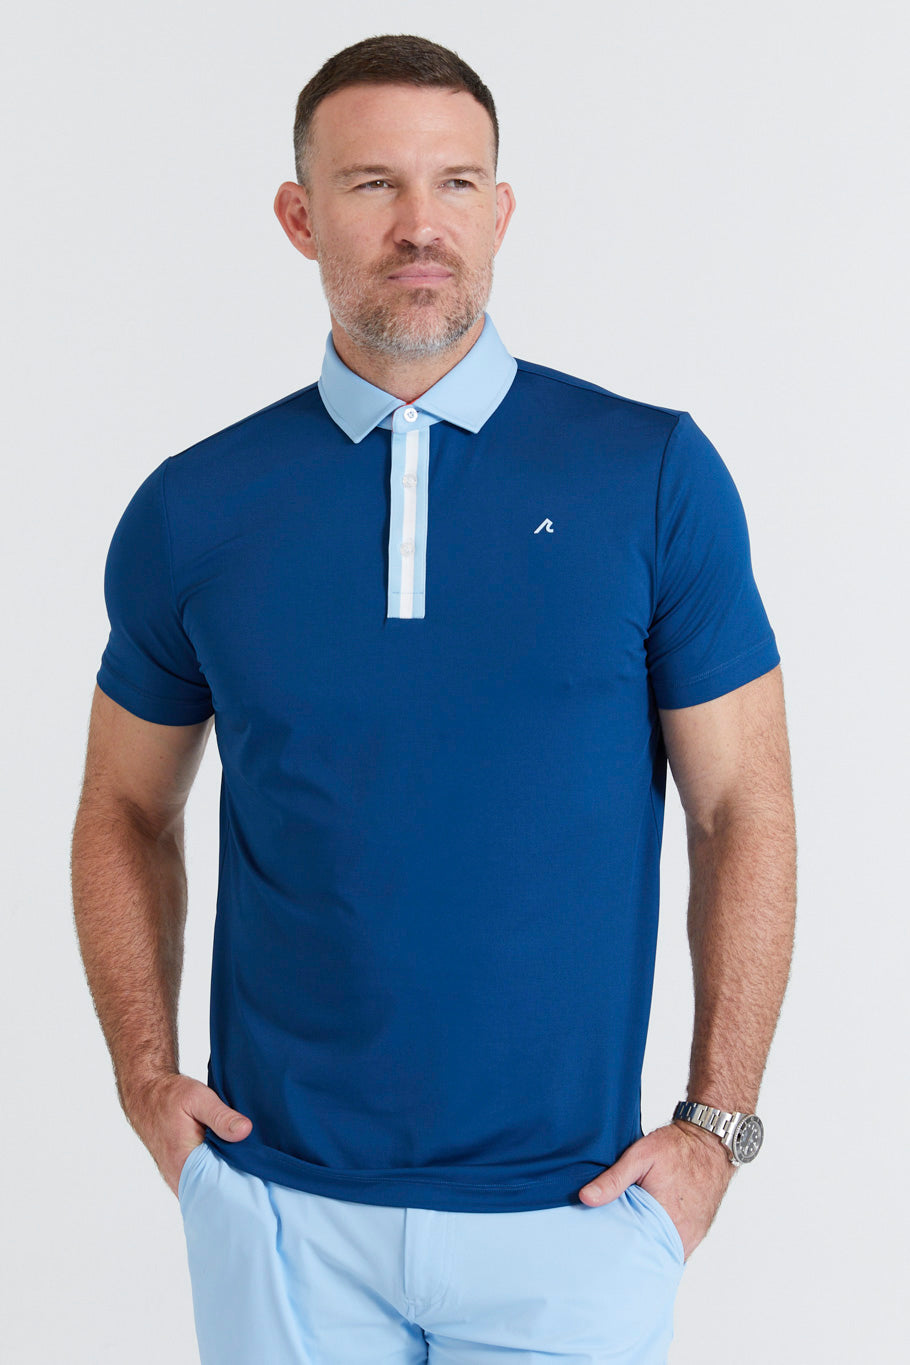 Image of the monroe polo in admiral ss23